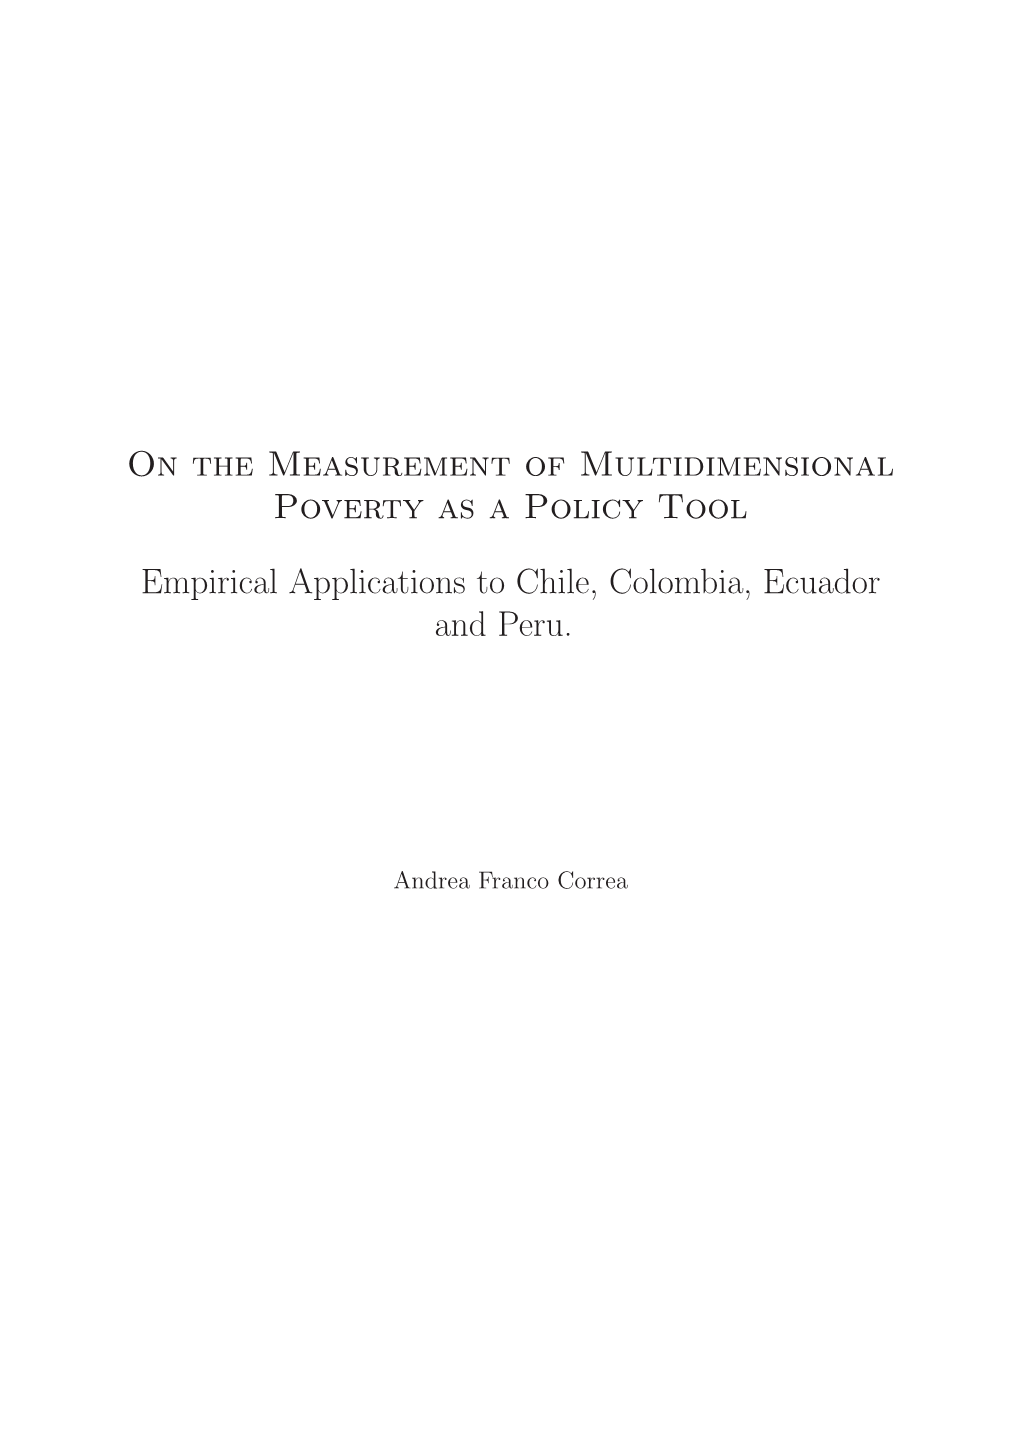 On the Measurement of Multidimensional Poverty As a Policy Tool Empirical Applications to Chile, Colombia, Ecuador and Peru